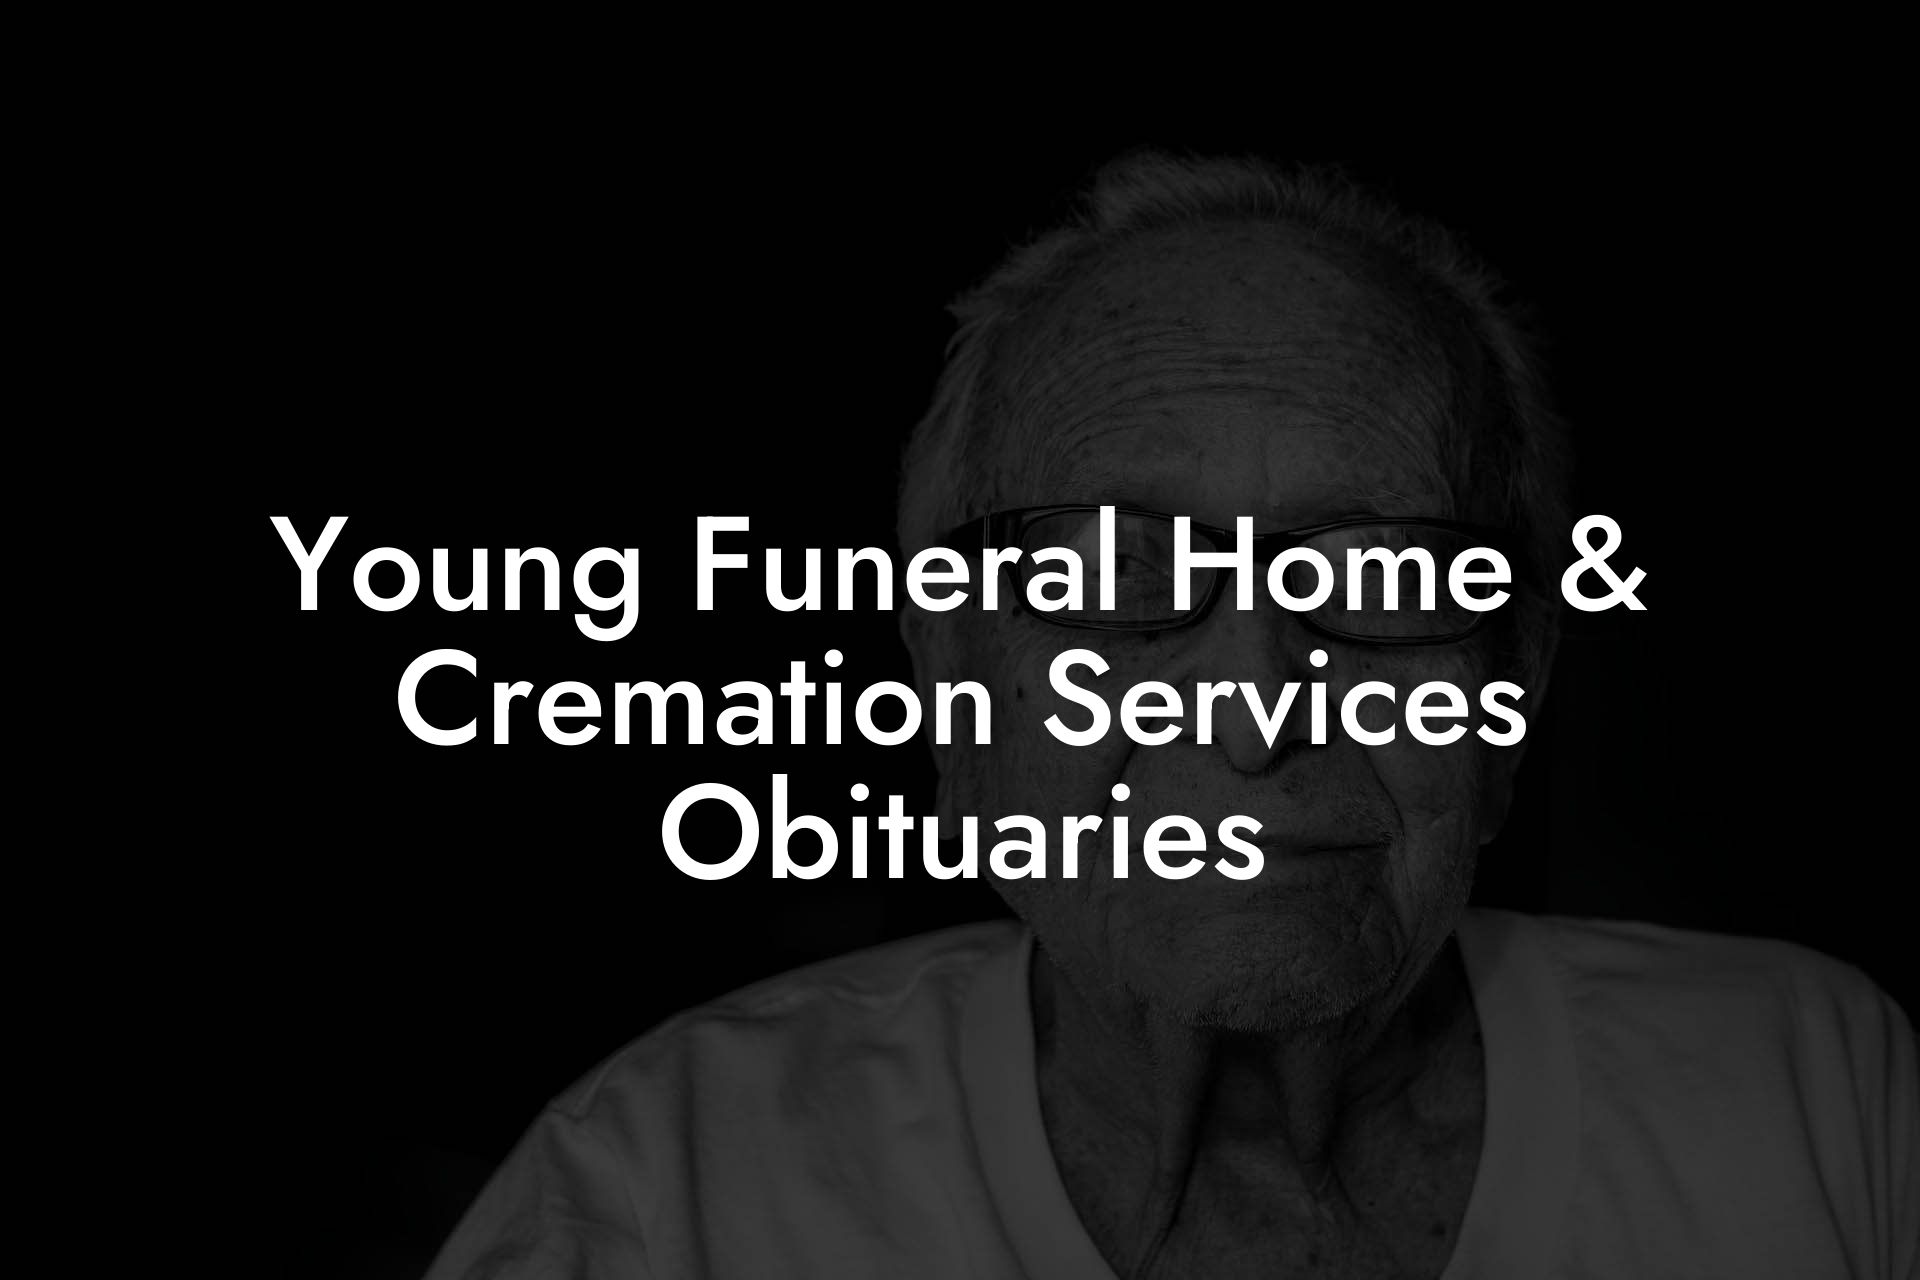 Young Funeral Home & Cremation Services Obituaries